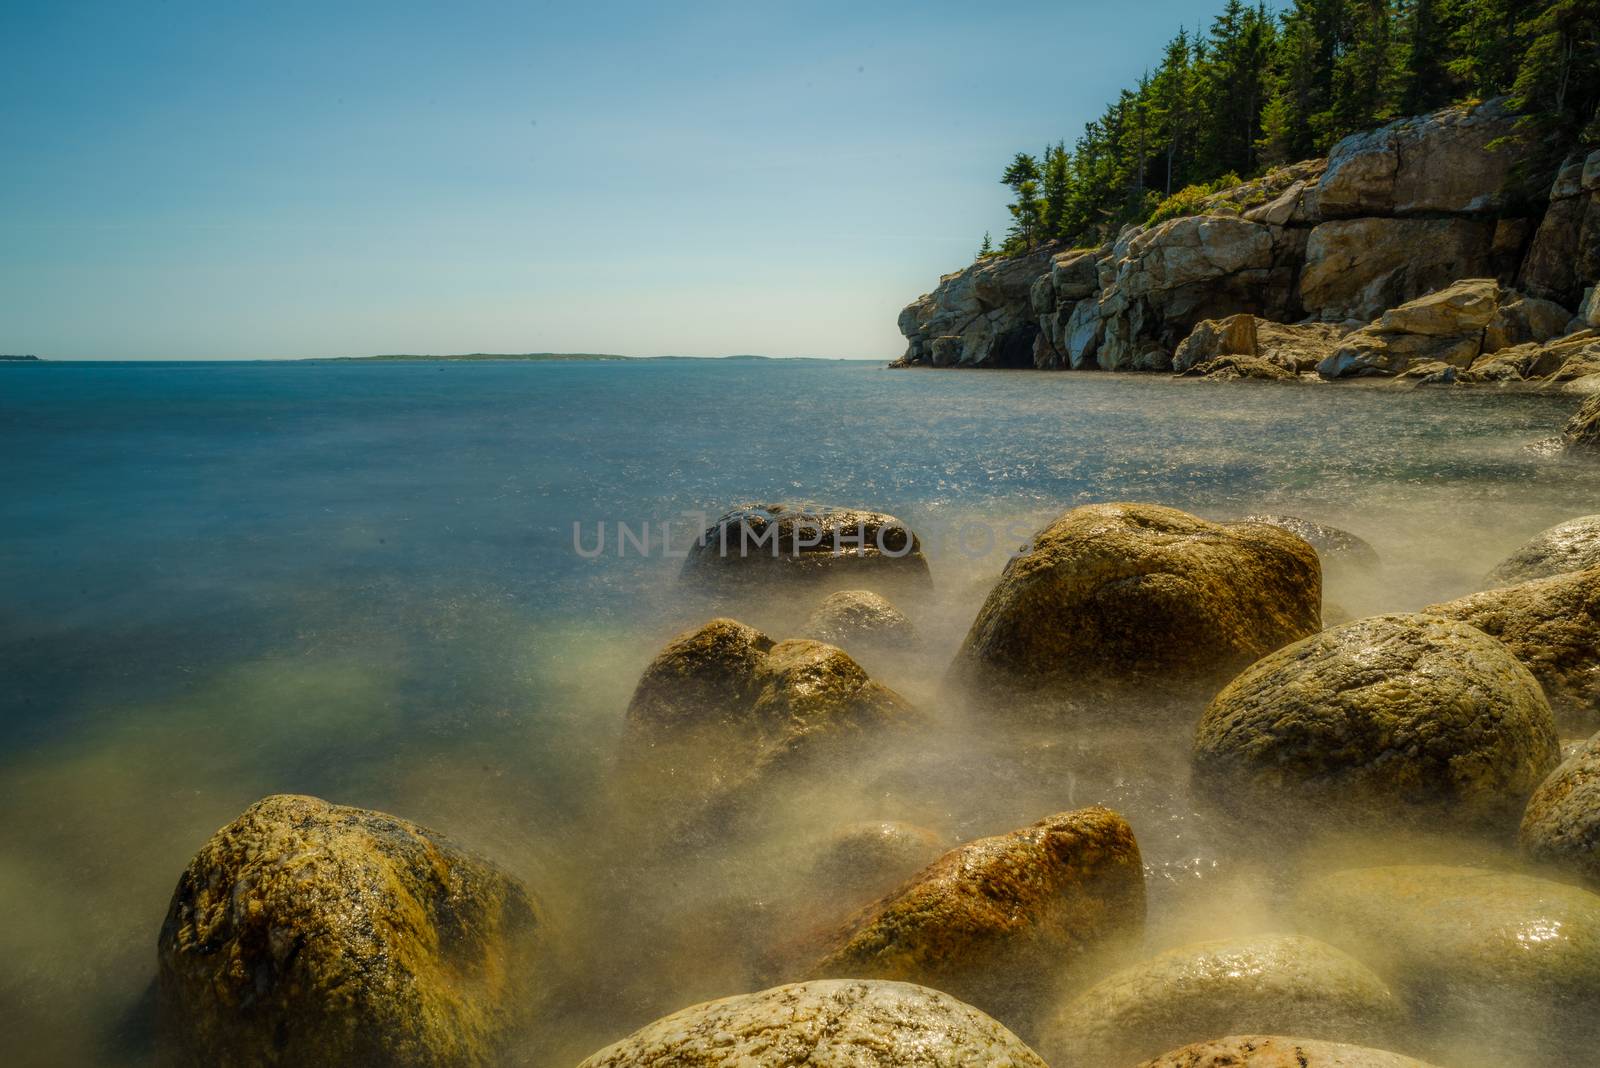 A time lapse picture of e soft, rock-strewn beach against a granite cliff in Maine